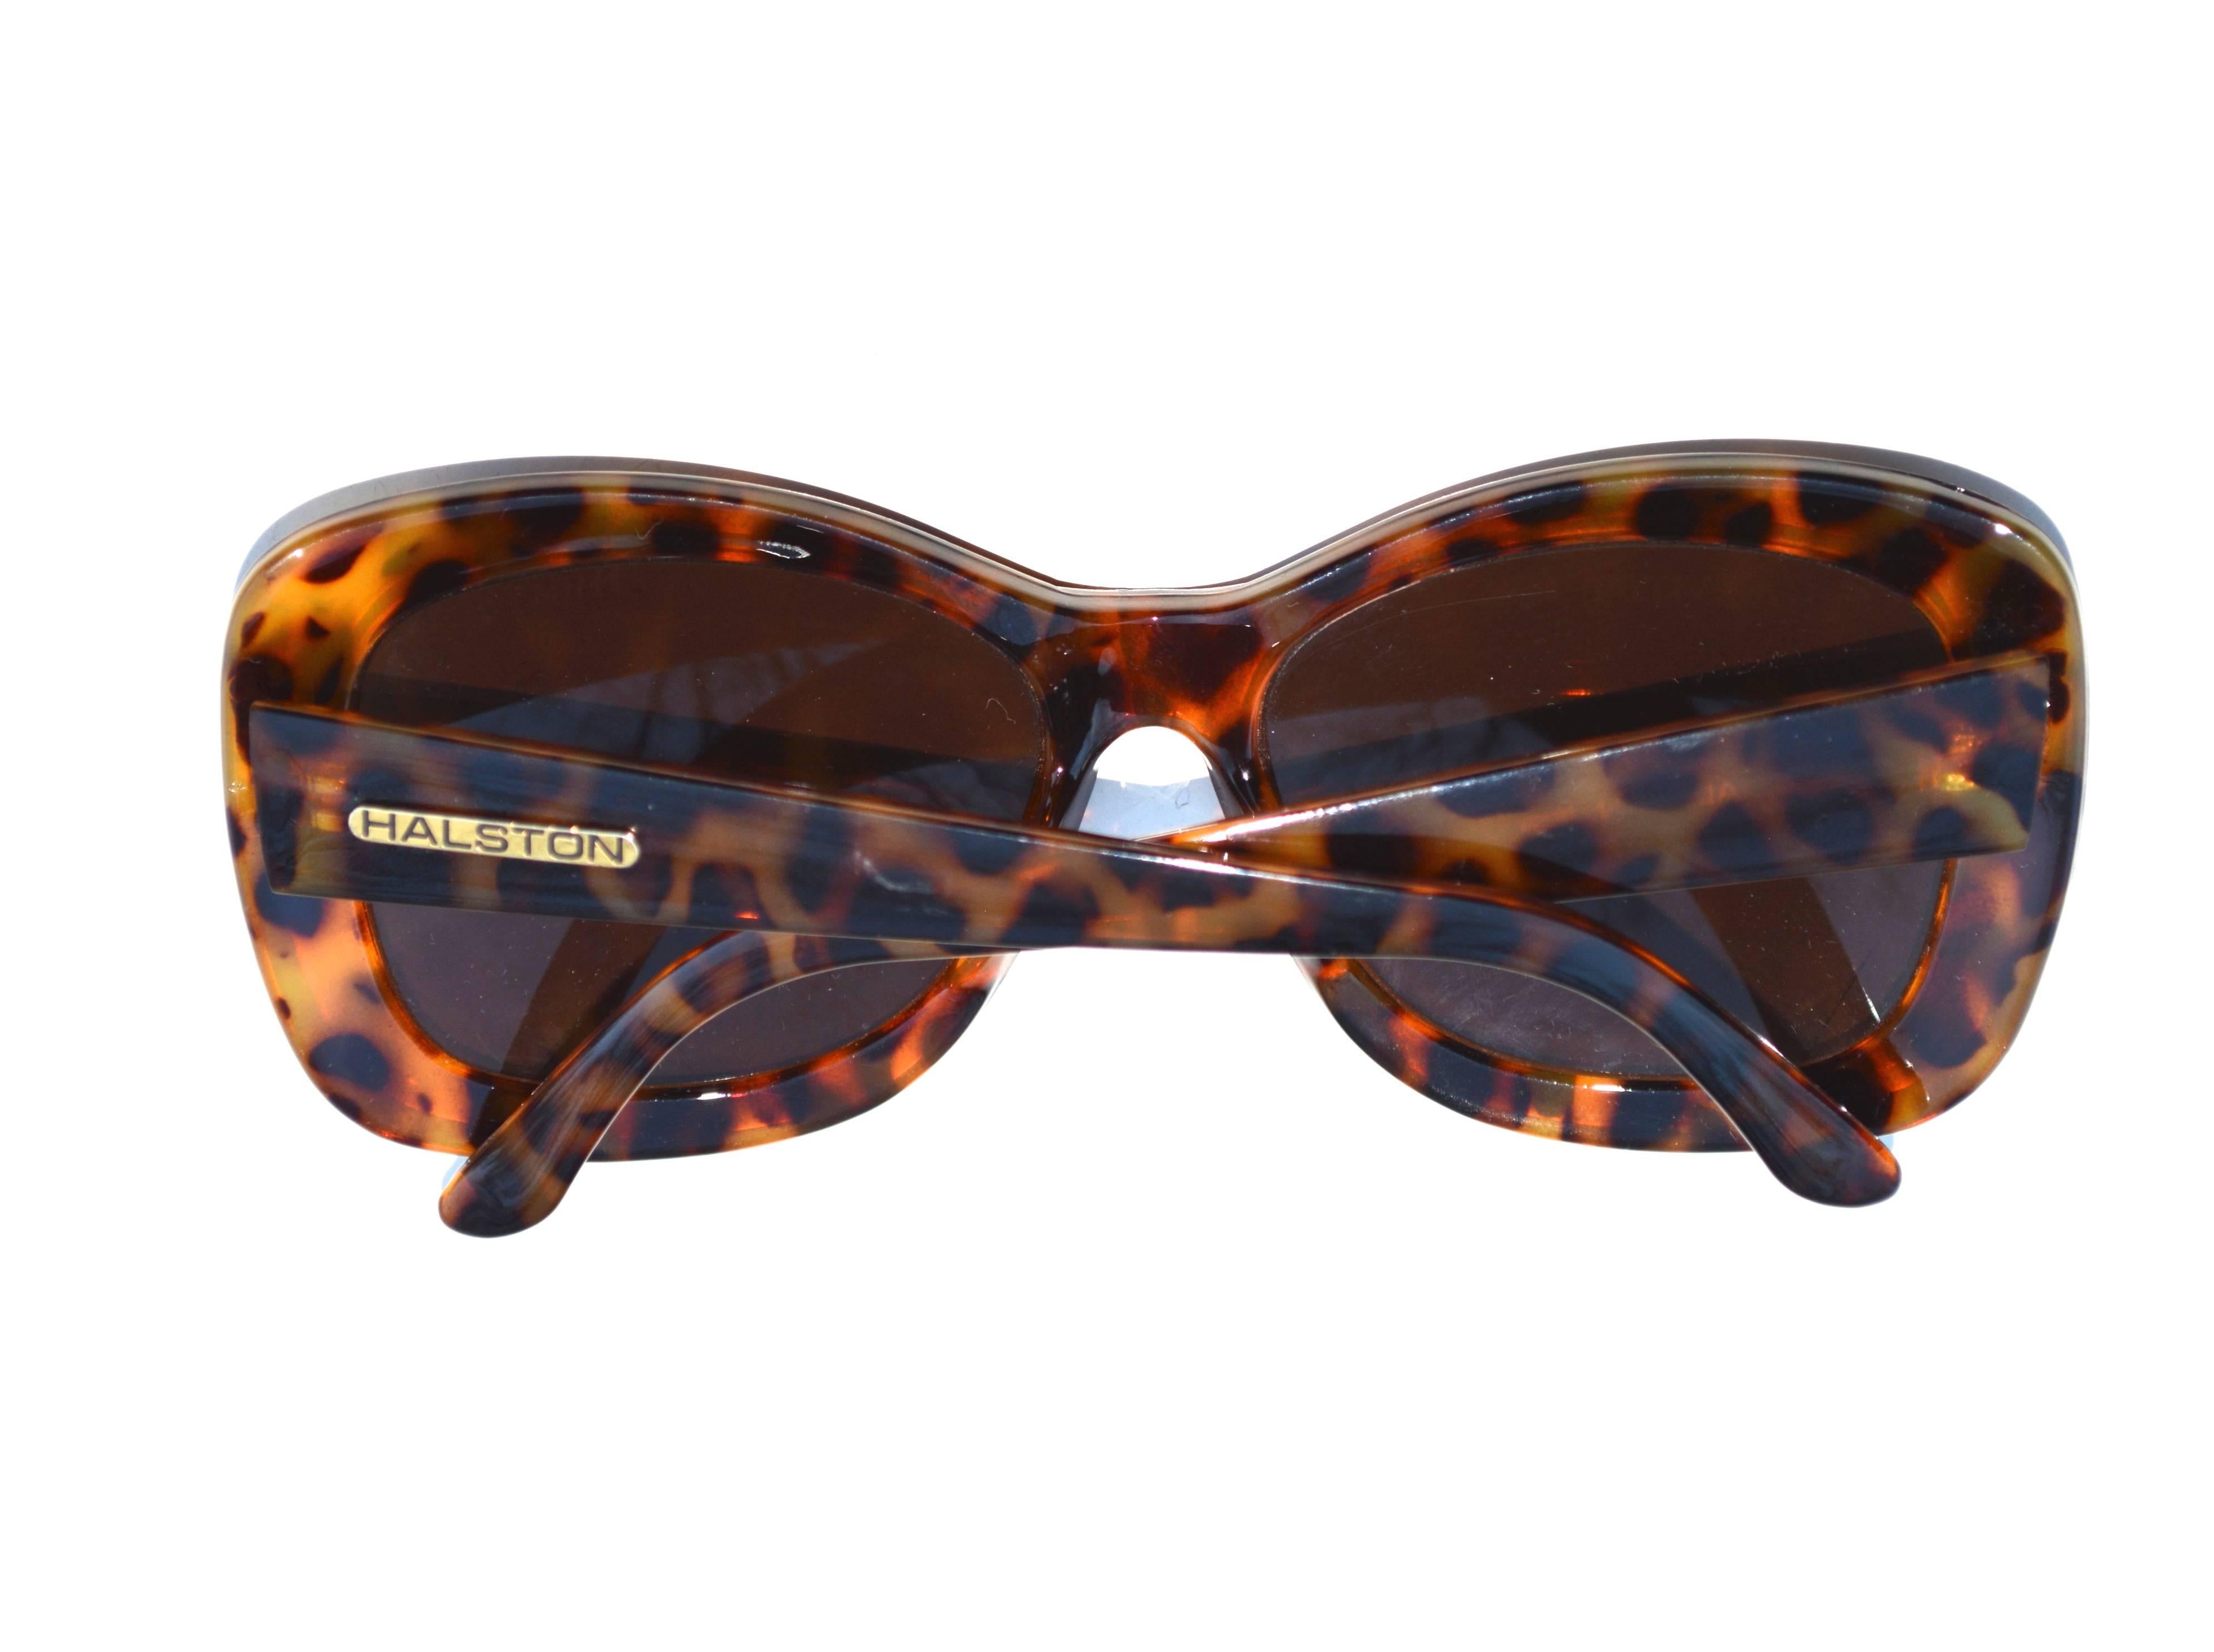 Signed and marked vintage Halston oversized sunglasses with a tortoise finish. The entire face is 6